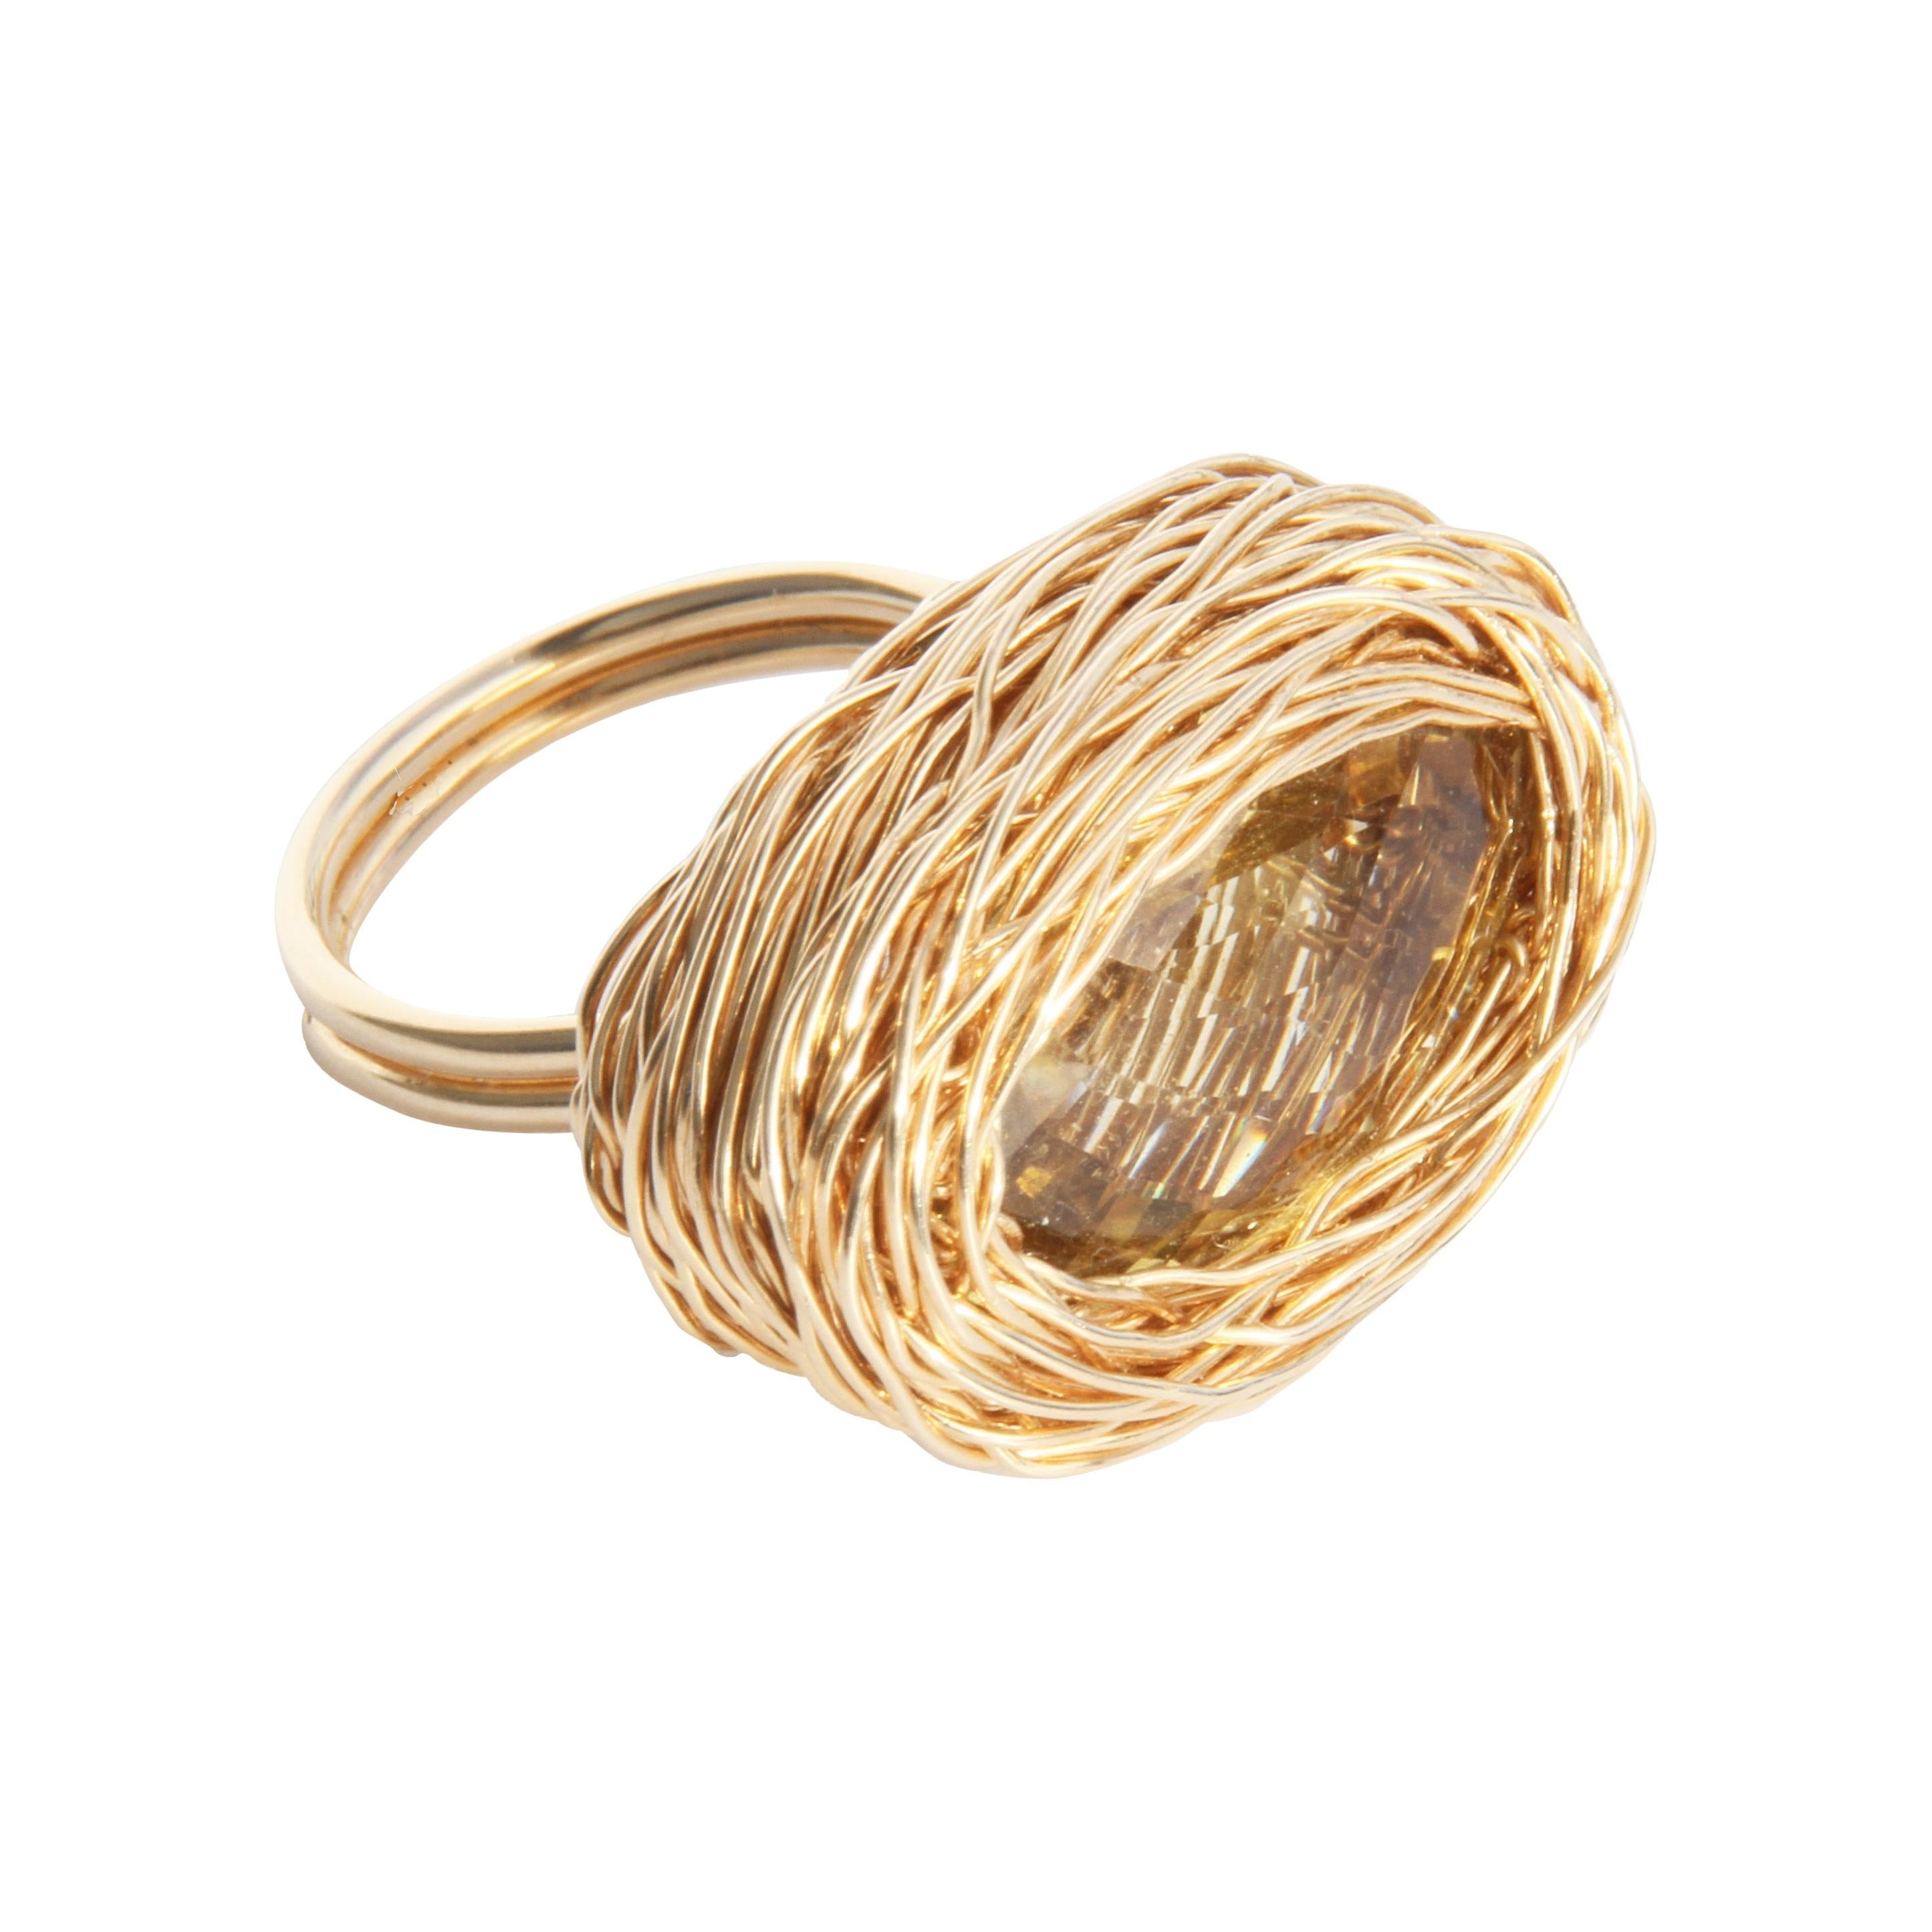 Faceted Vibrant Citrine in Yellow Gold Cocktail Statement Ring by Sheila Westera